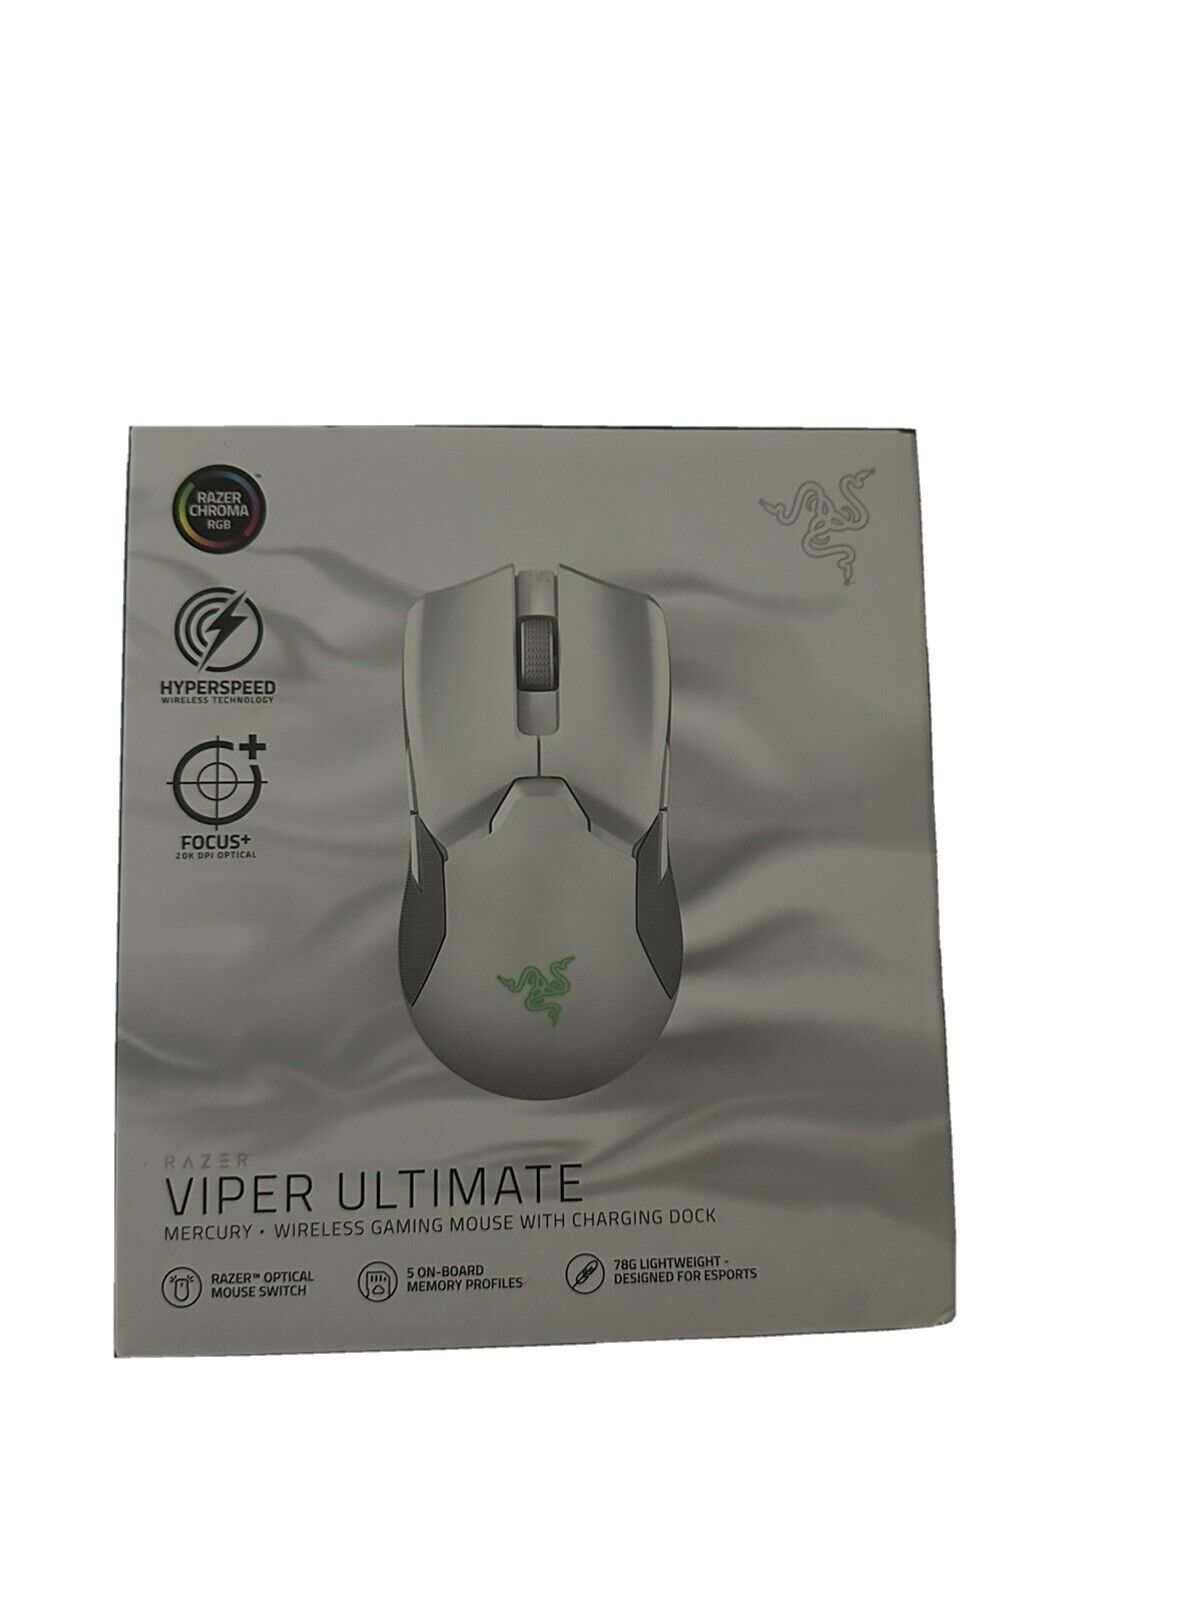 PC/タブレット PC周辺機器 Razer Viper Ultimate Wireless Gaming Mouse With Dock - Mercury for 